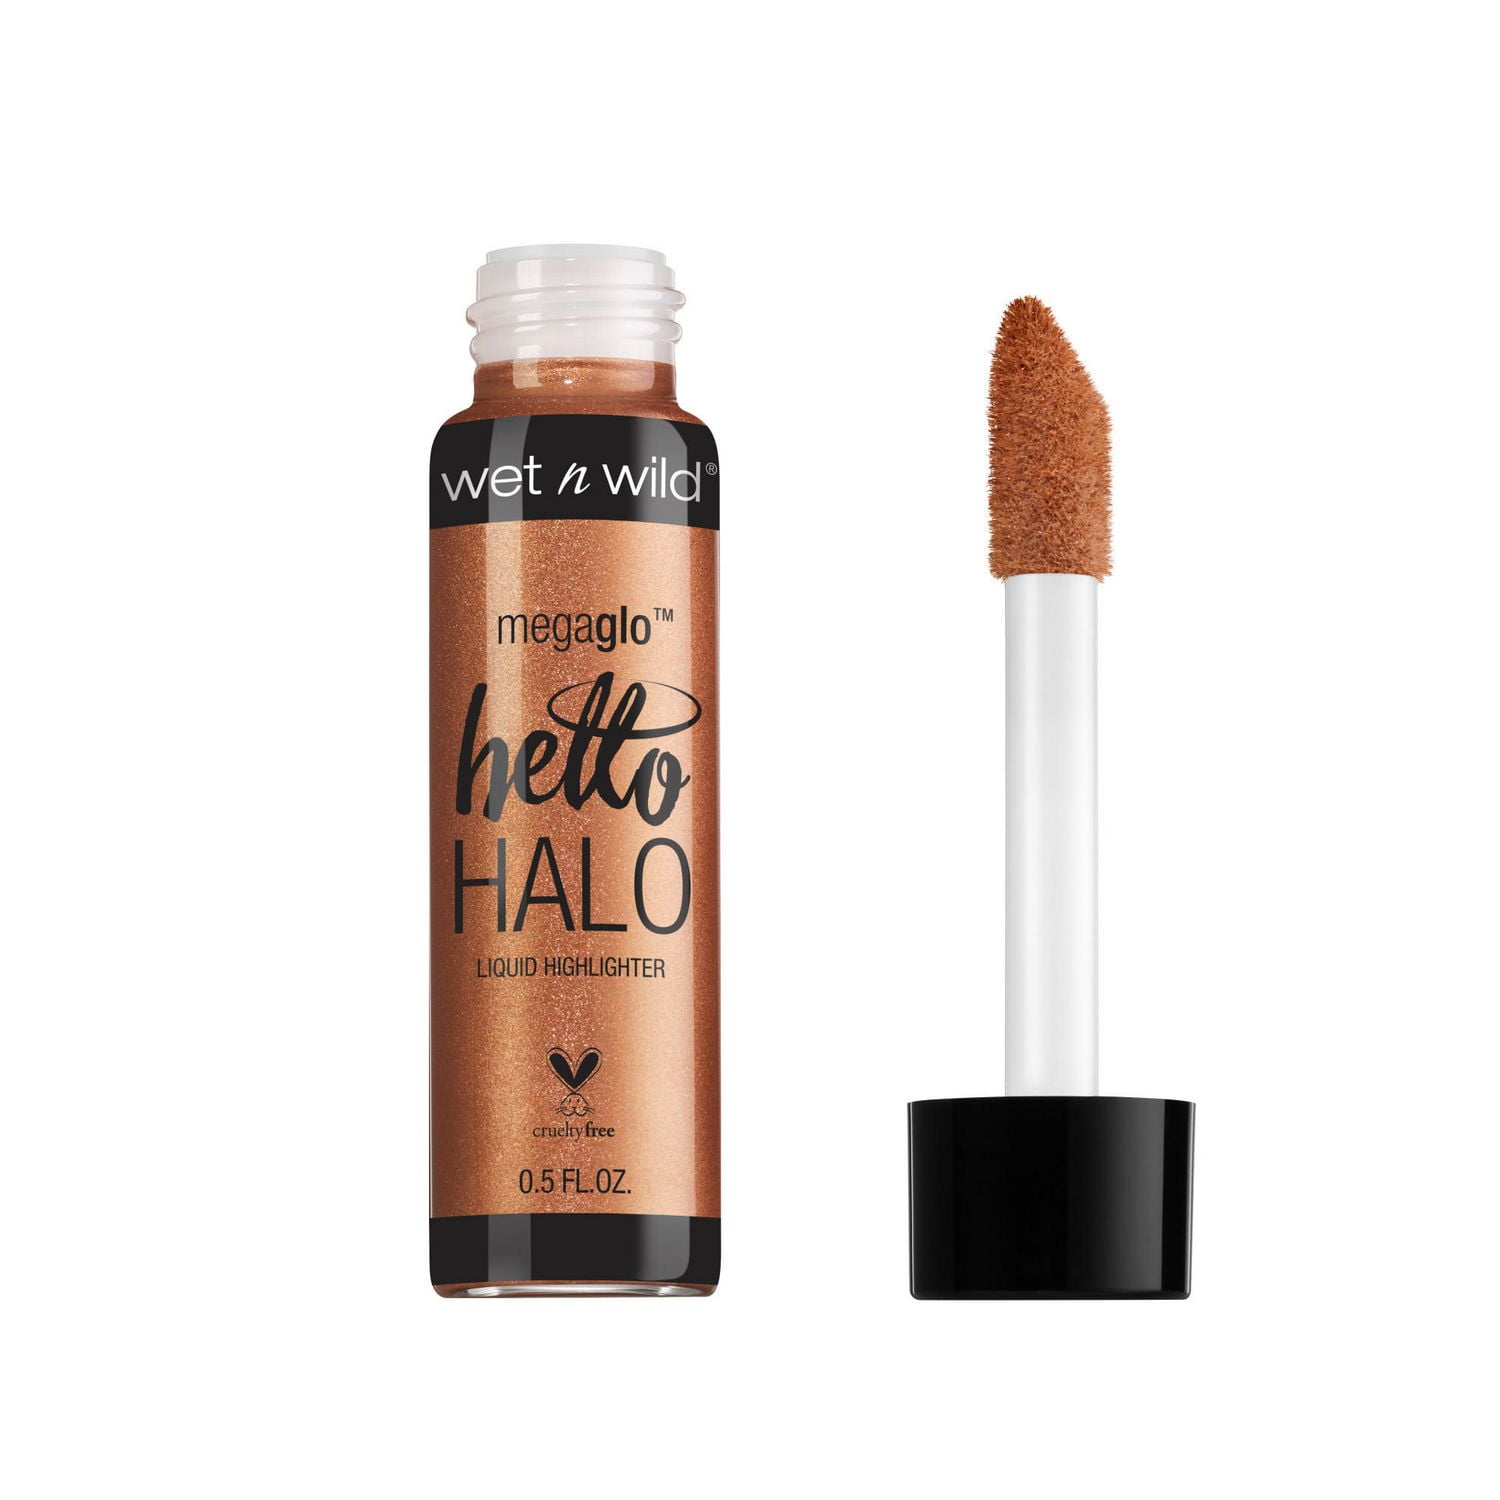 e.l.f. Cosmetics Halo Glow Liquid Filter, Complexion Booster For A Glowing,  Soft-Focus Look, Infused With Hyaluronic Acid, Vegan & Cruelty-Free. 31.5  ml 